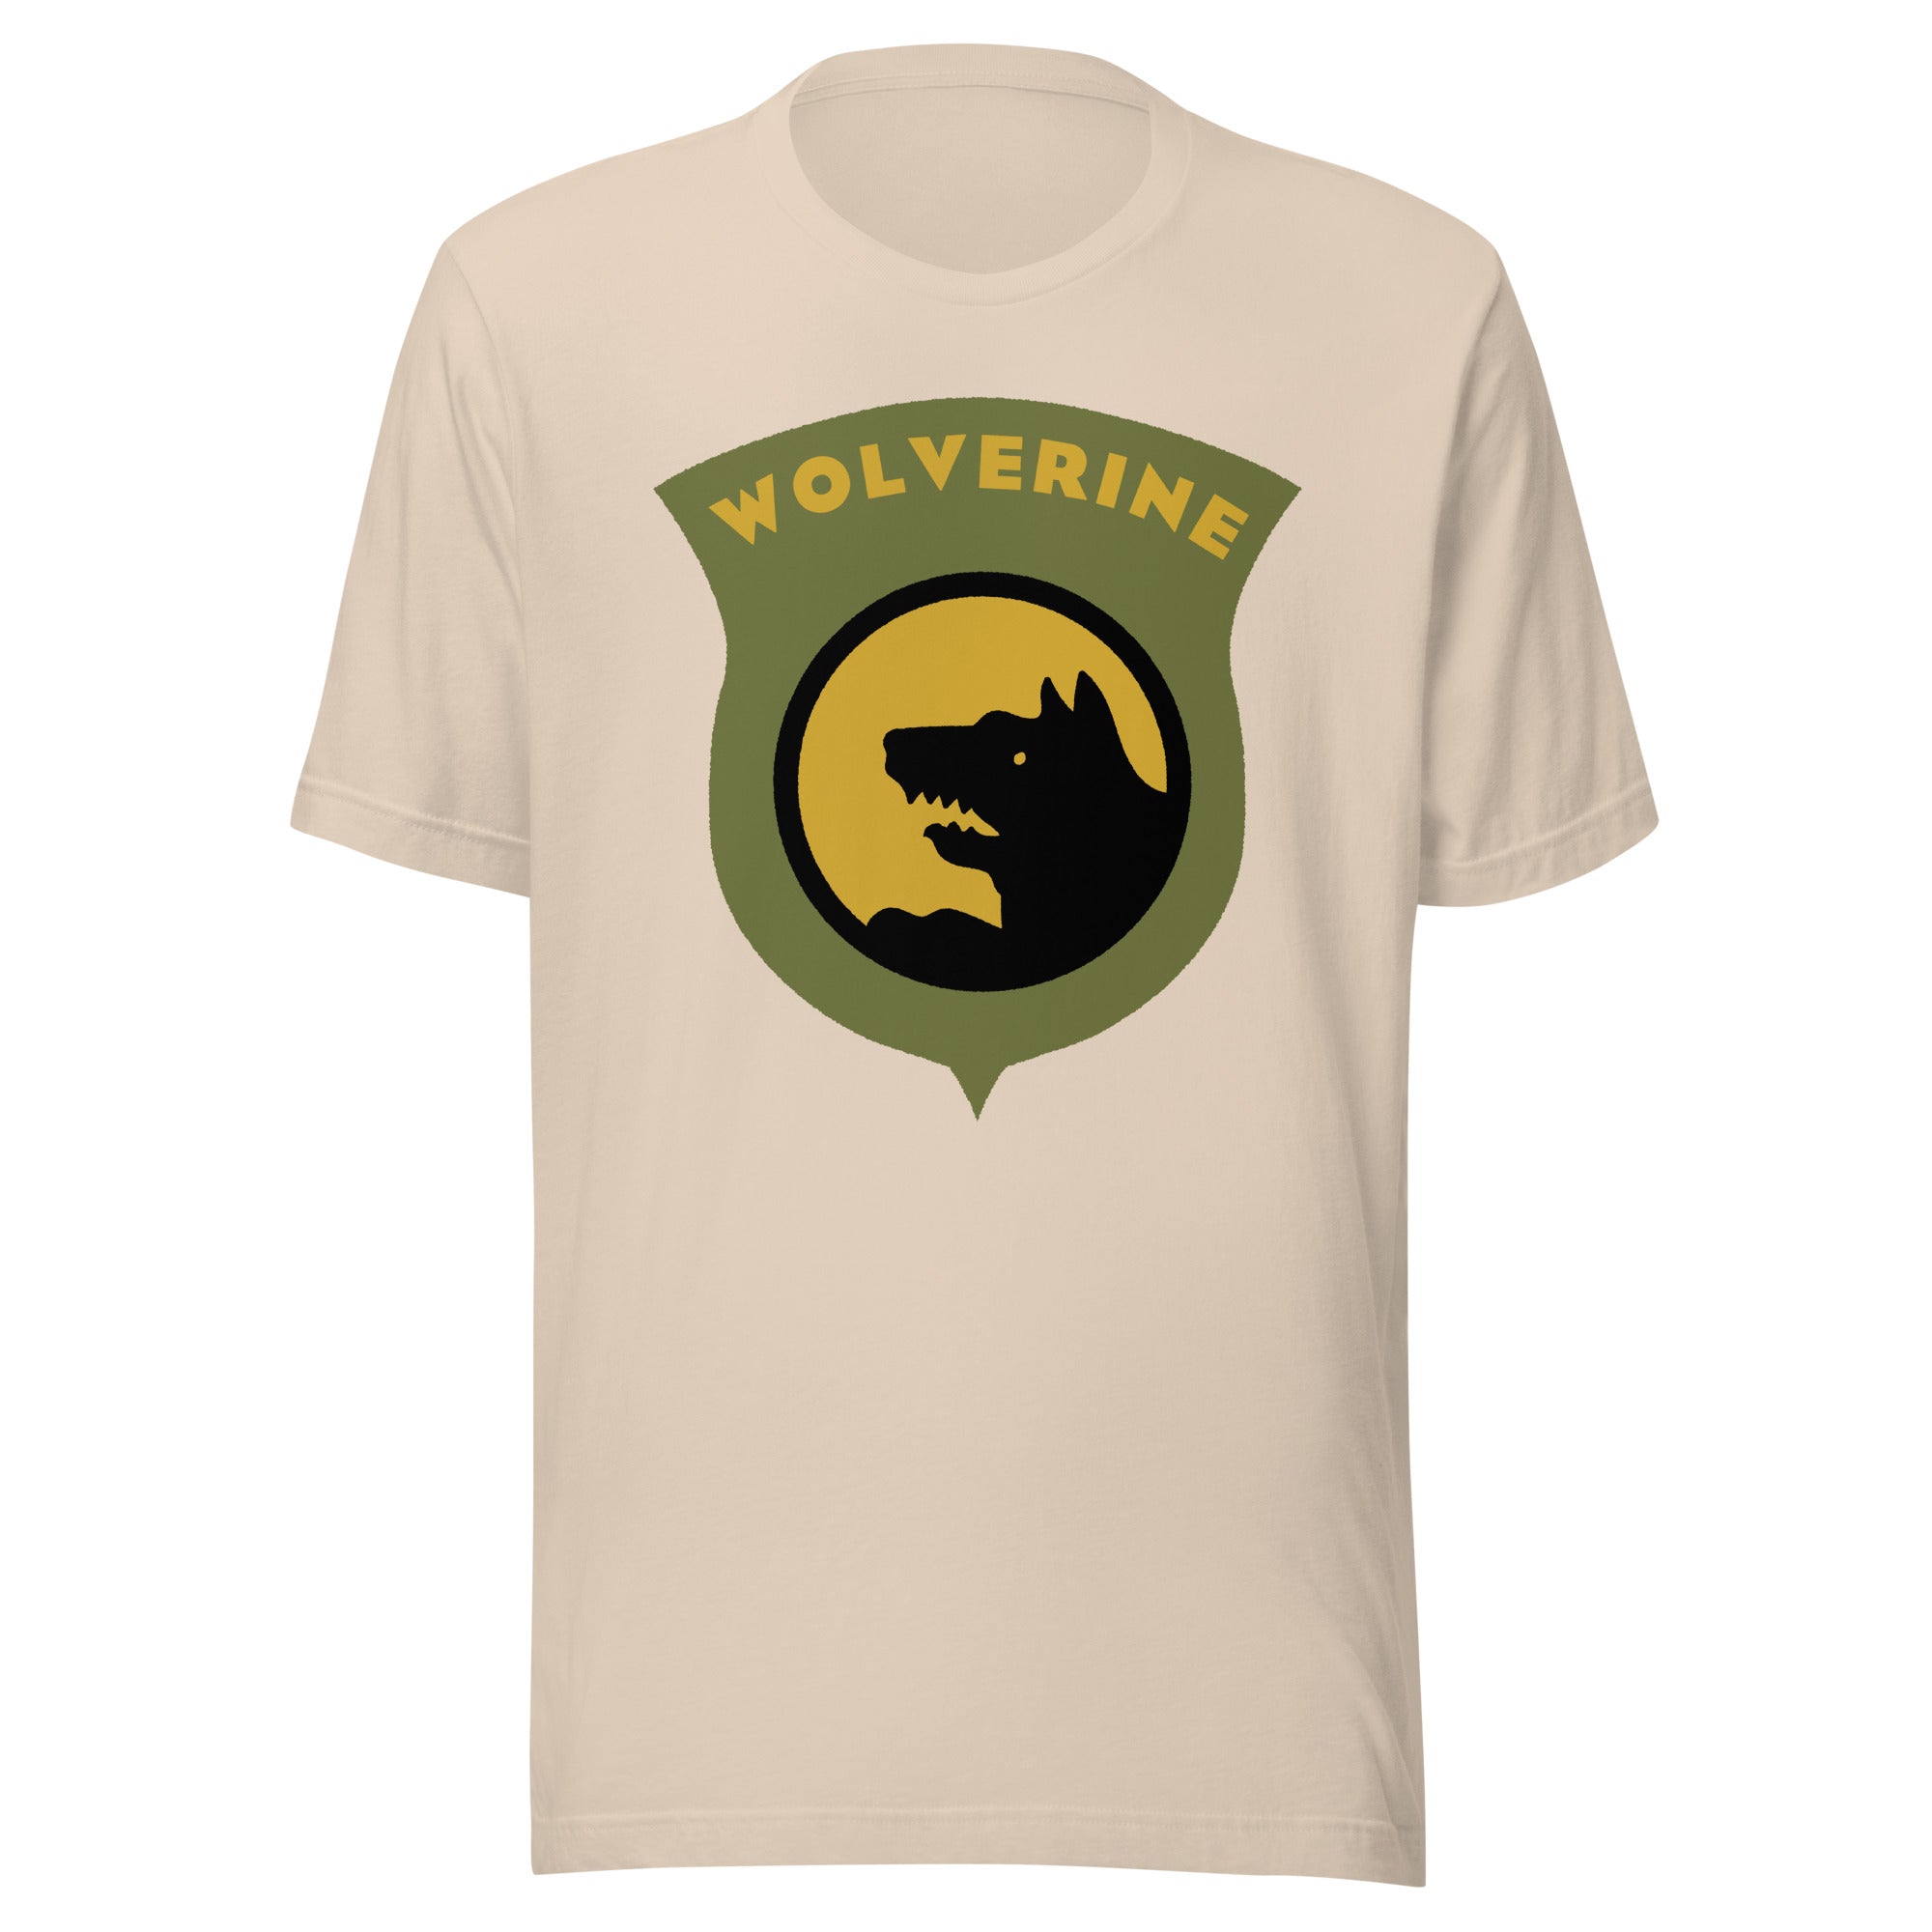 14th Wolverine Division Insignia T-Shirt